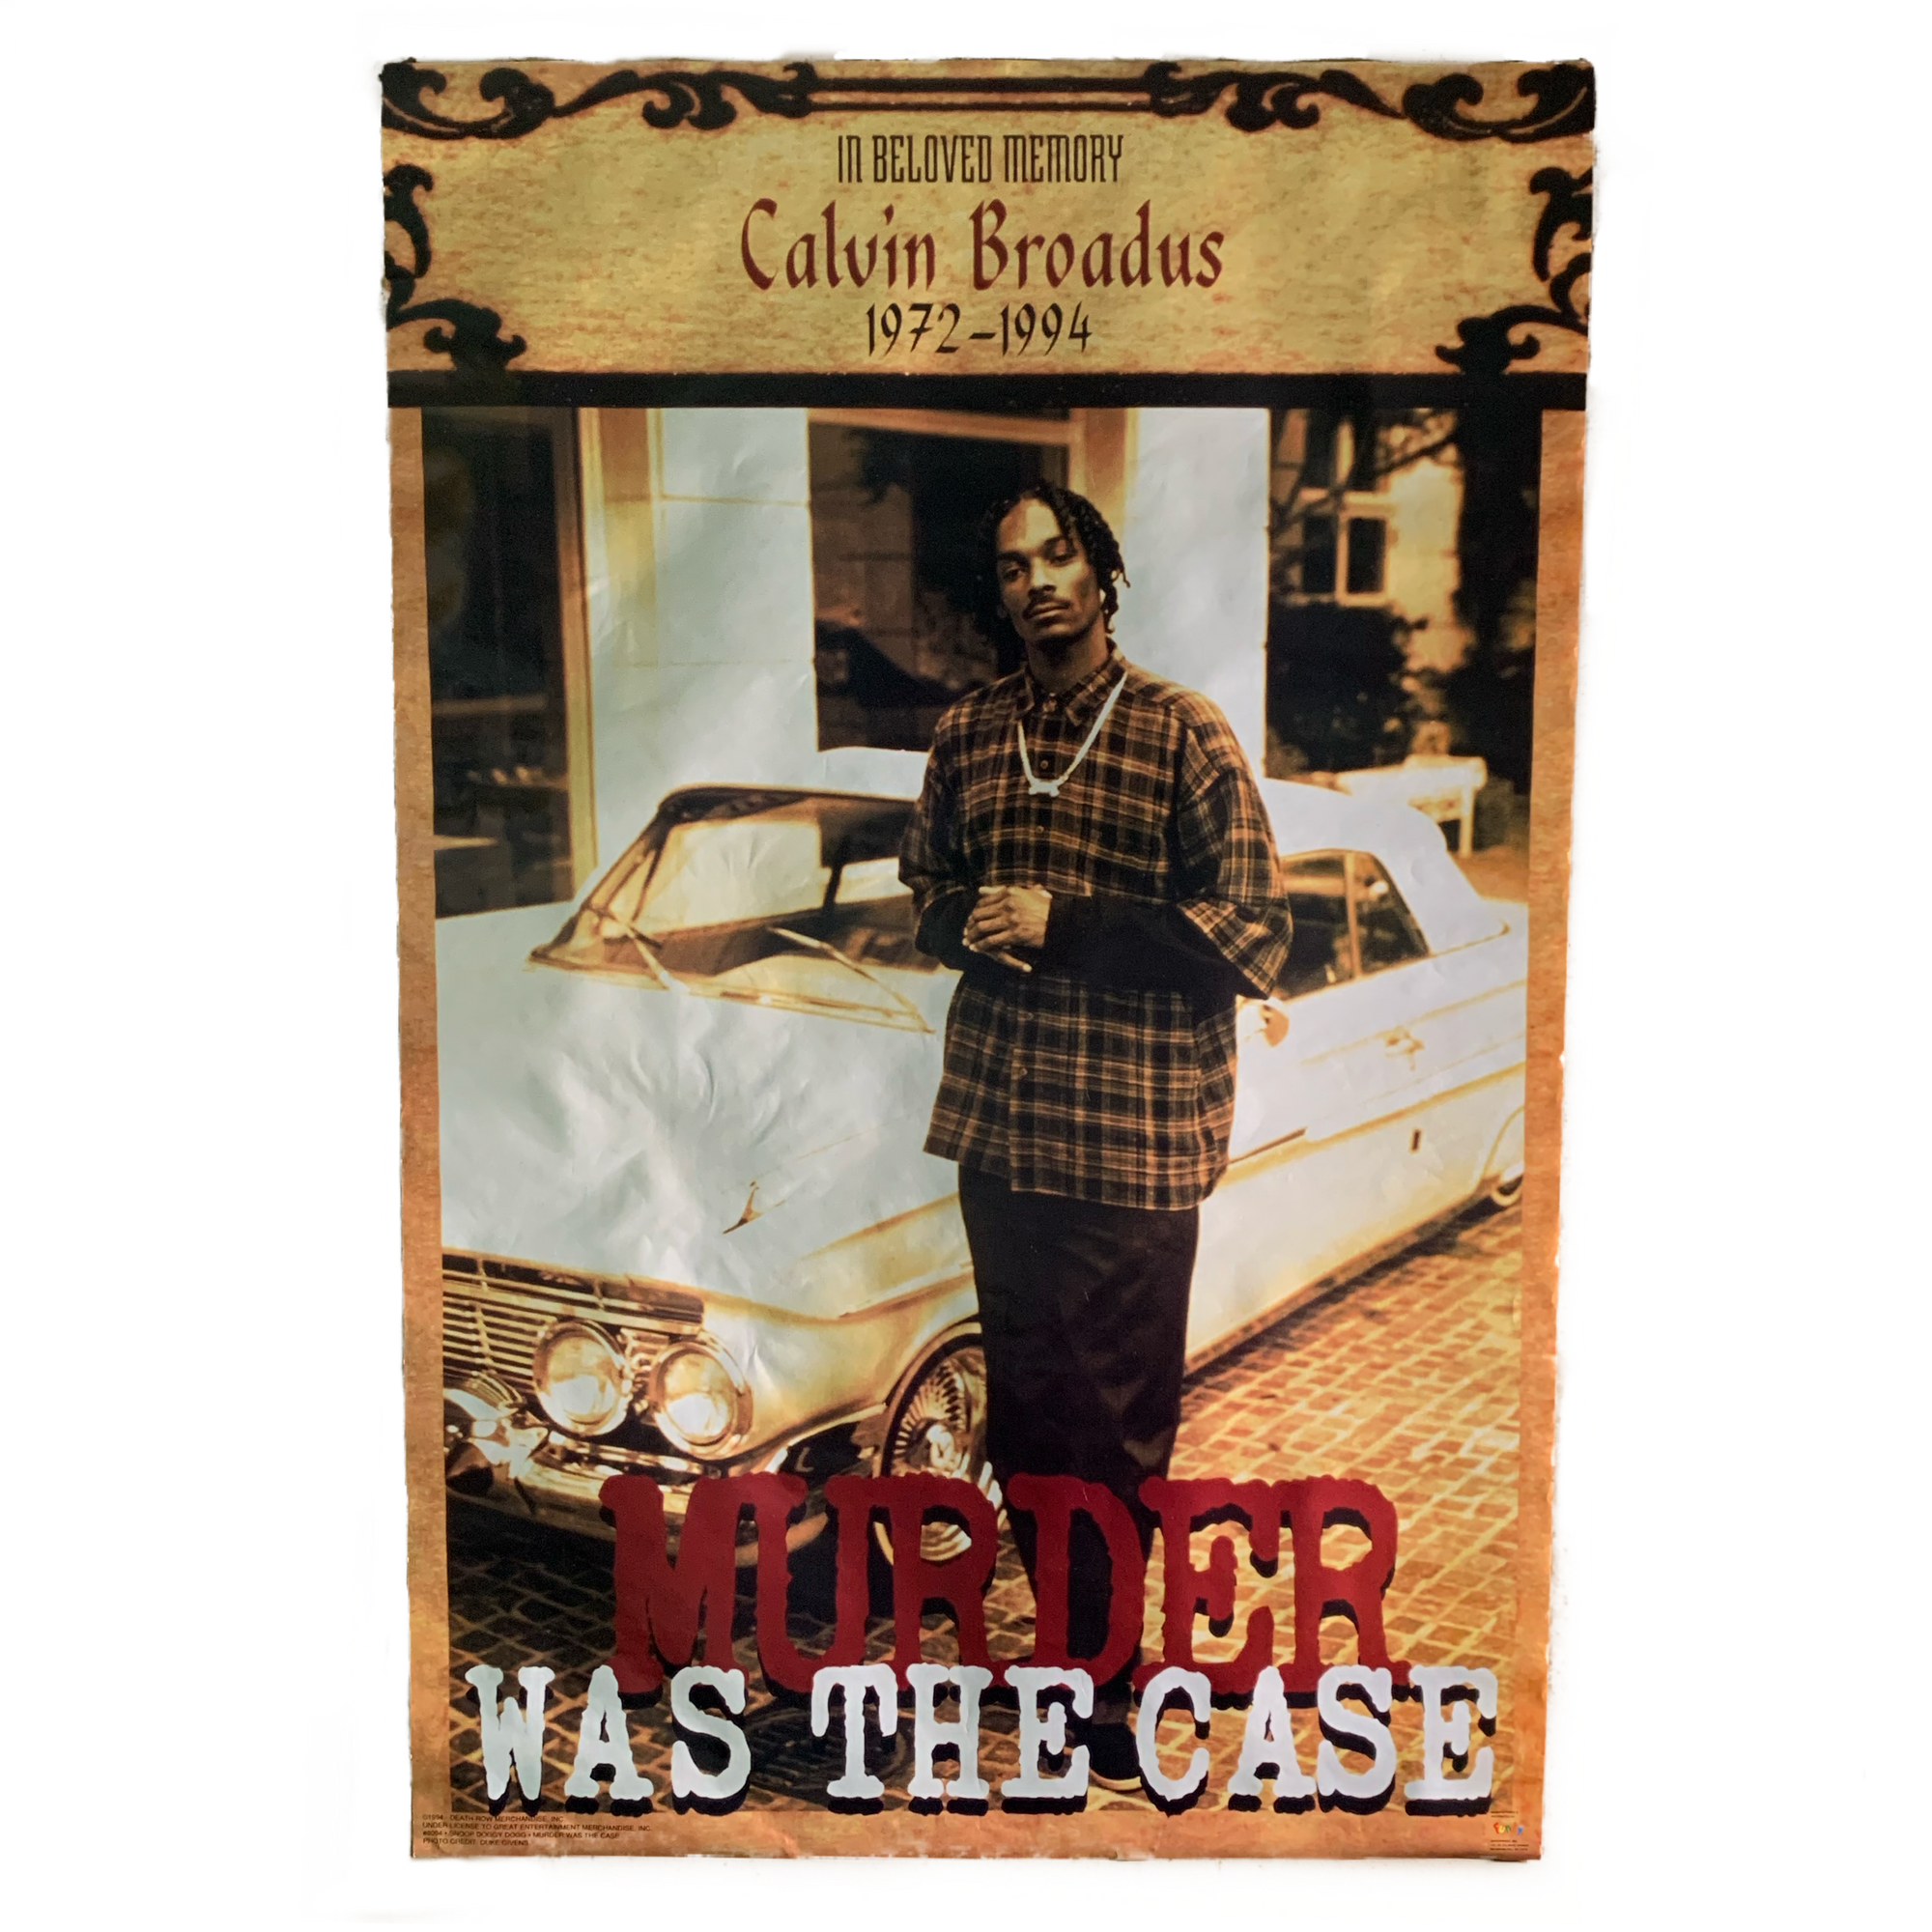 Vintage Snoop Dogg Murder Was The Case “Death Row Records” Promo Poster - jointcustodydc